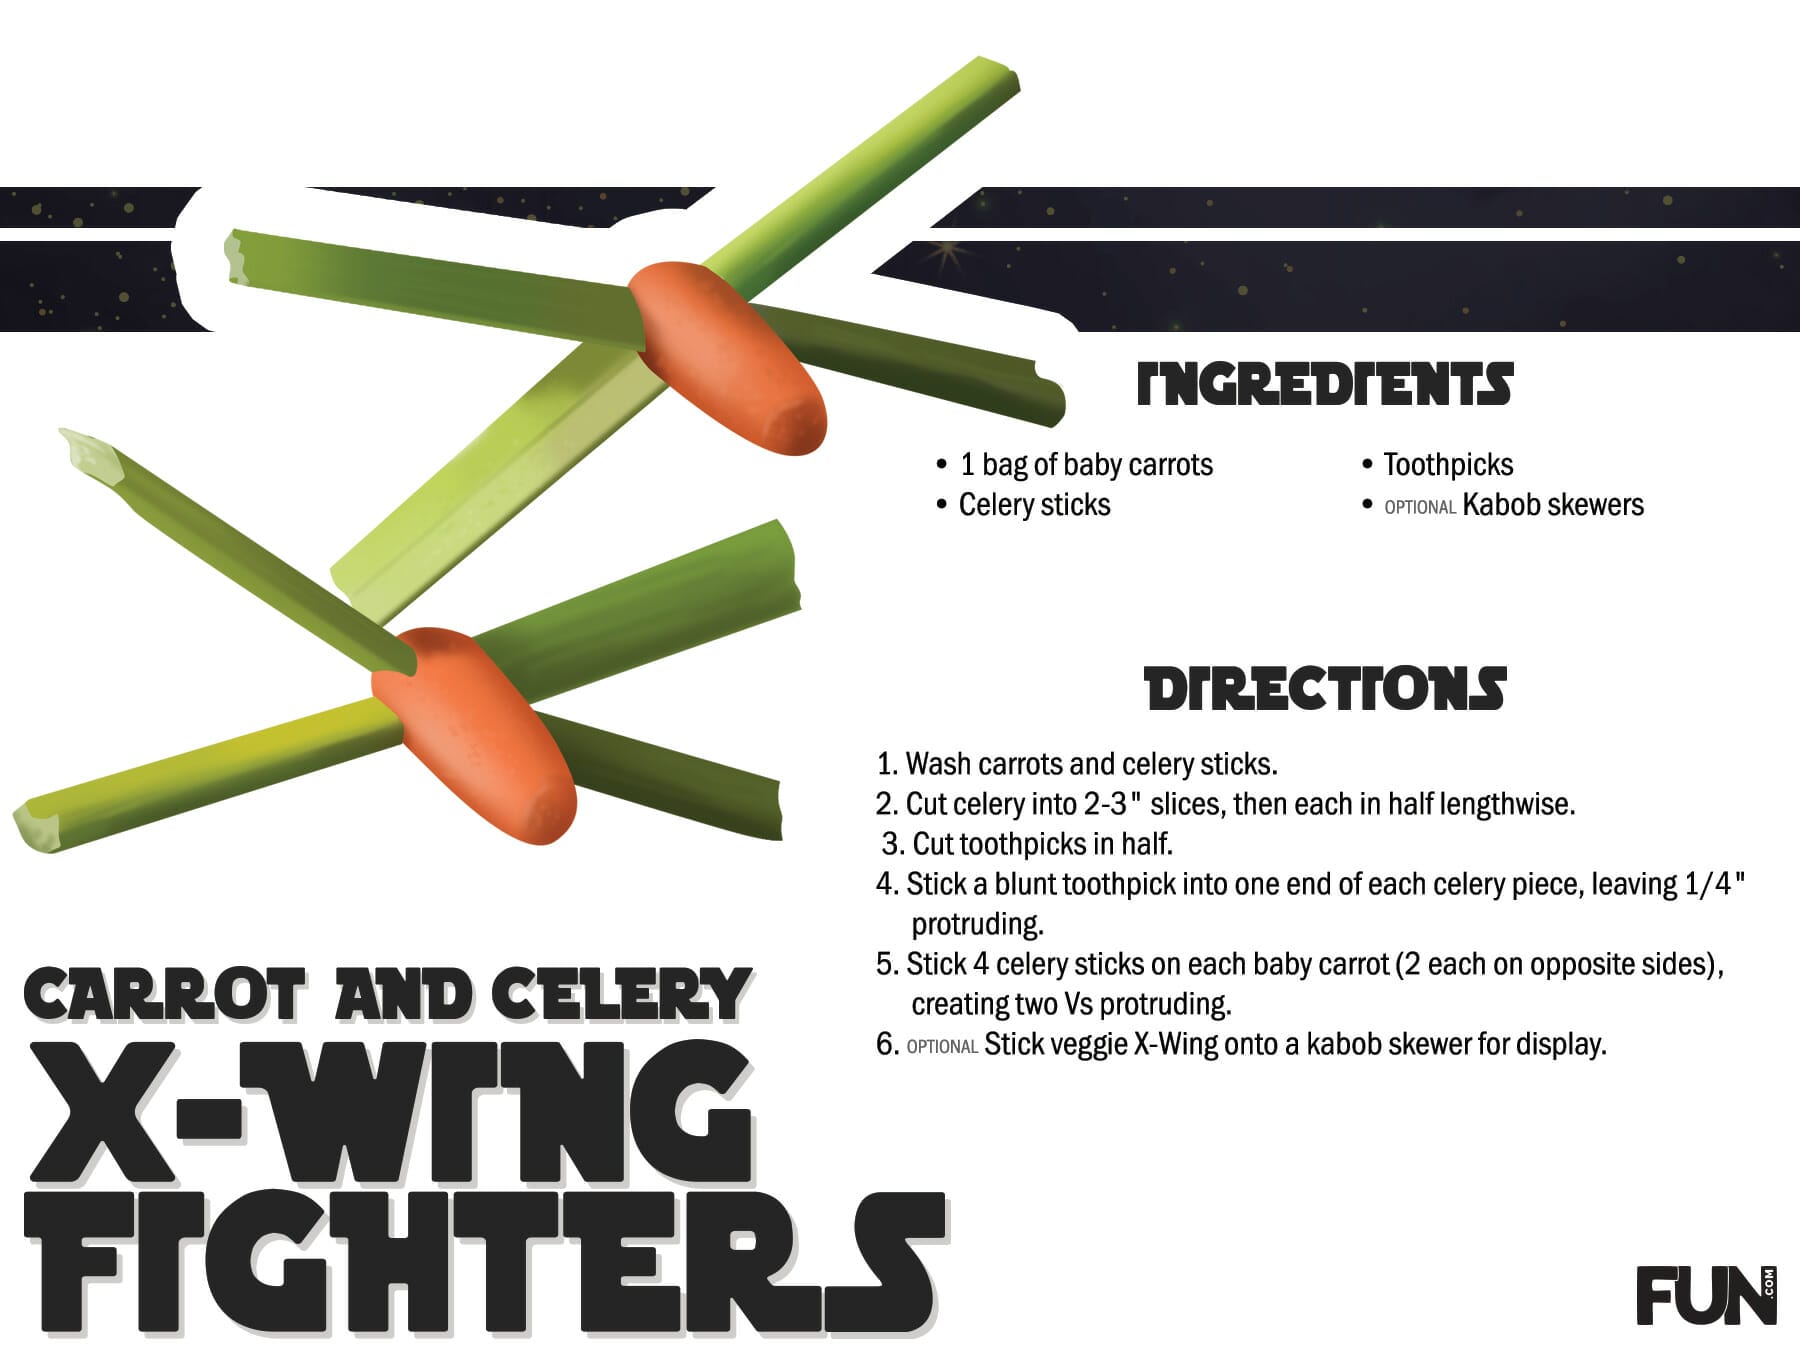 How to make carrot and celery x-wings